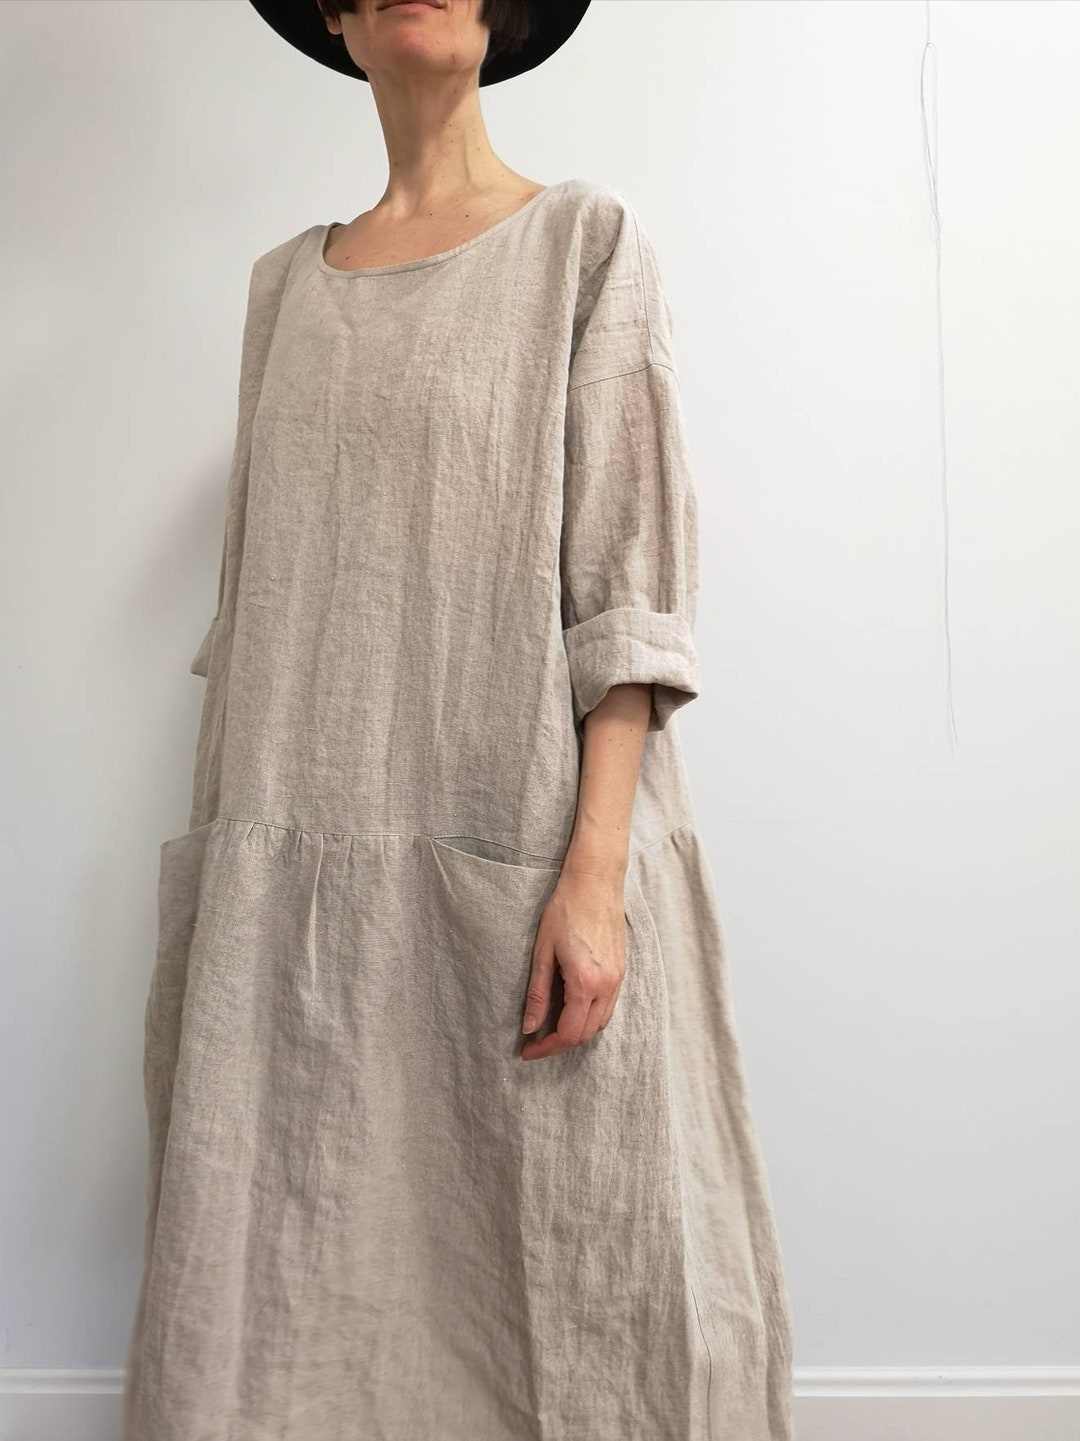 Aria Gray Linen Dress L, Relaxed Fit Natural Linen Dress, Relaxed Style ...